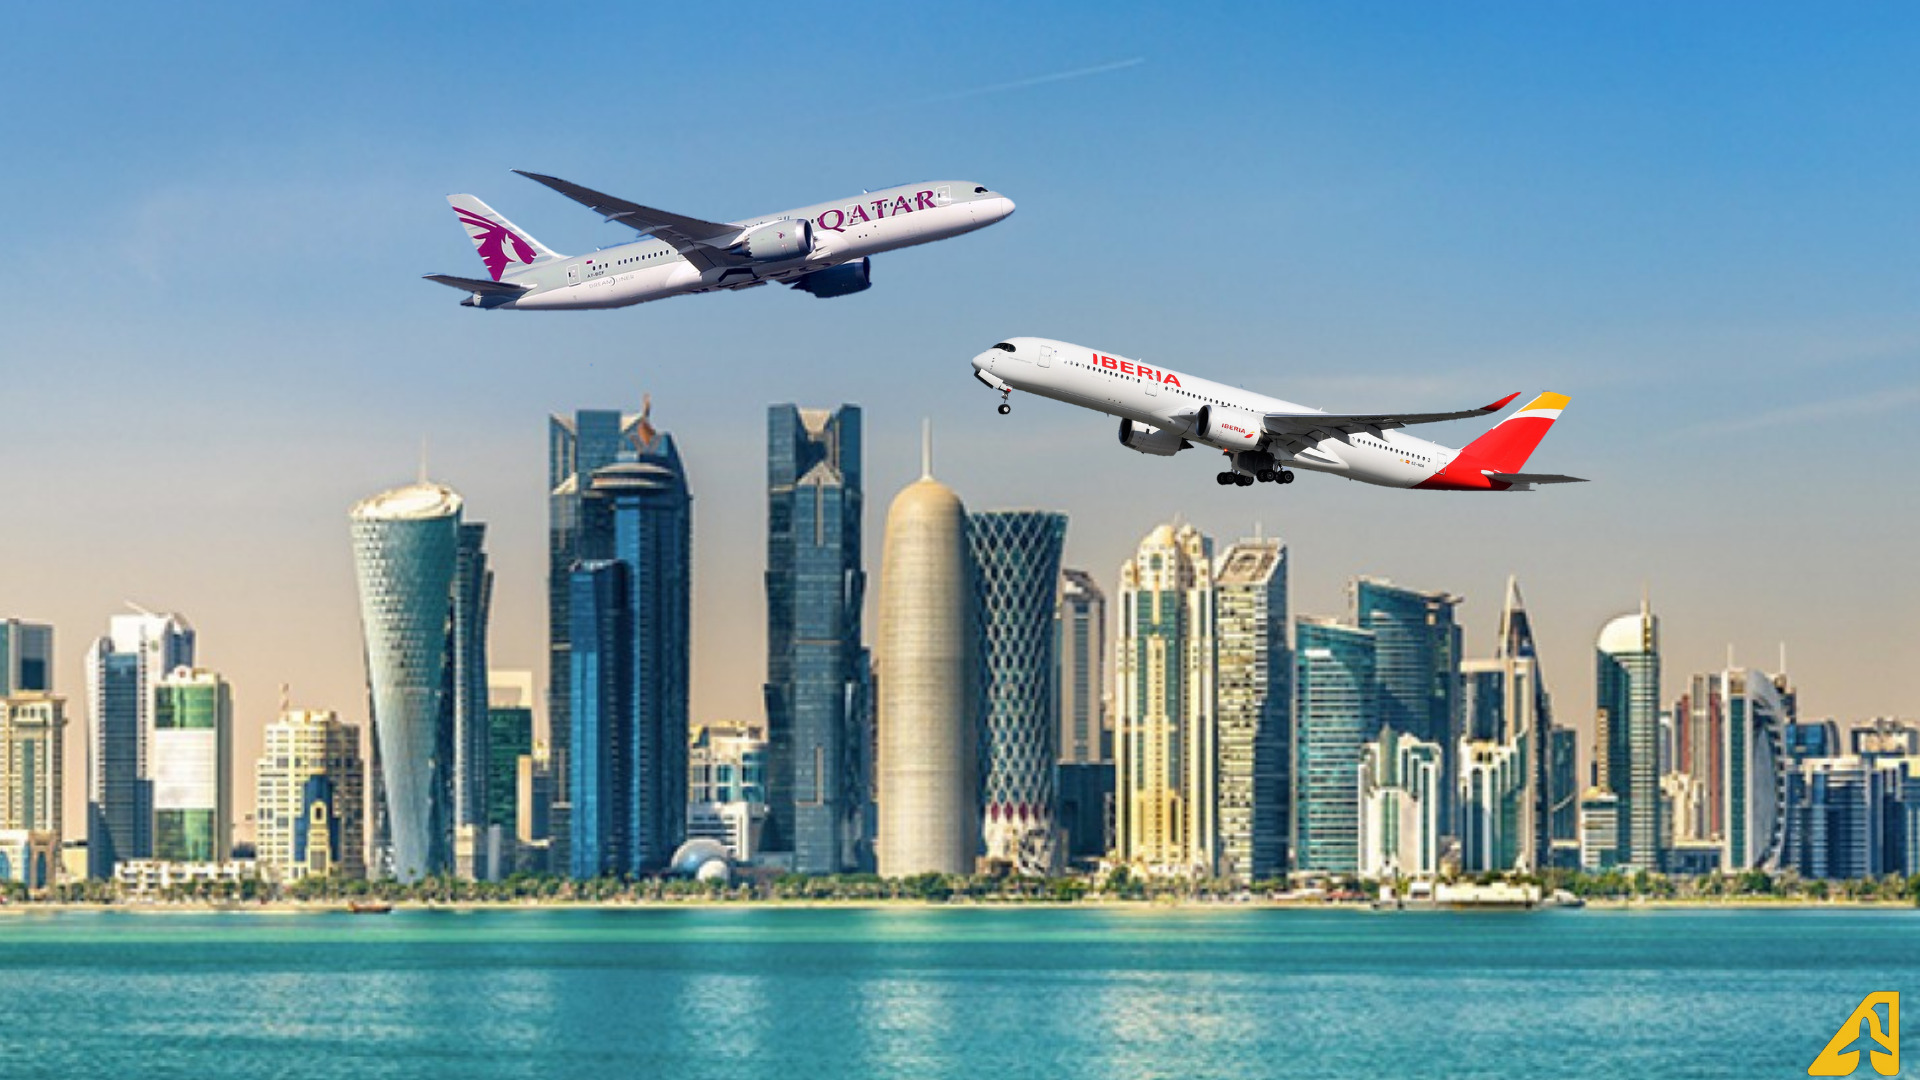 Dominican Republic approves codeshare between Iberia and Qatar Airways ...